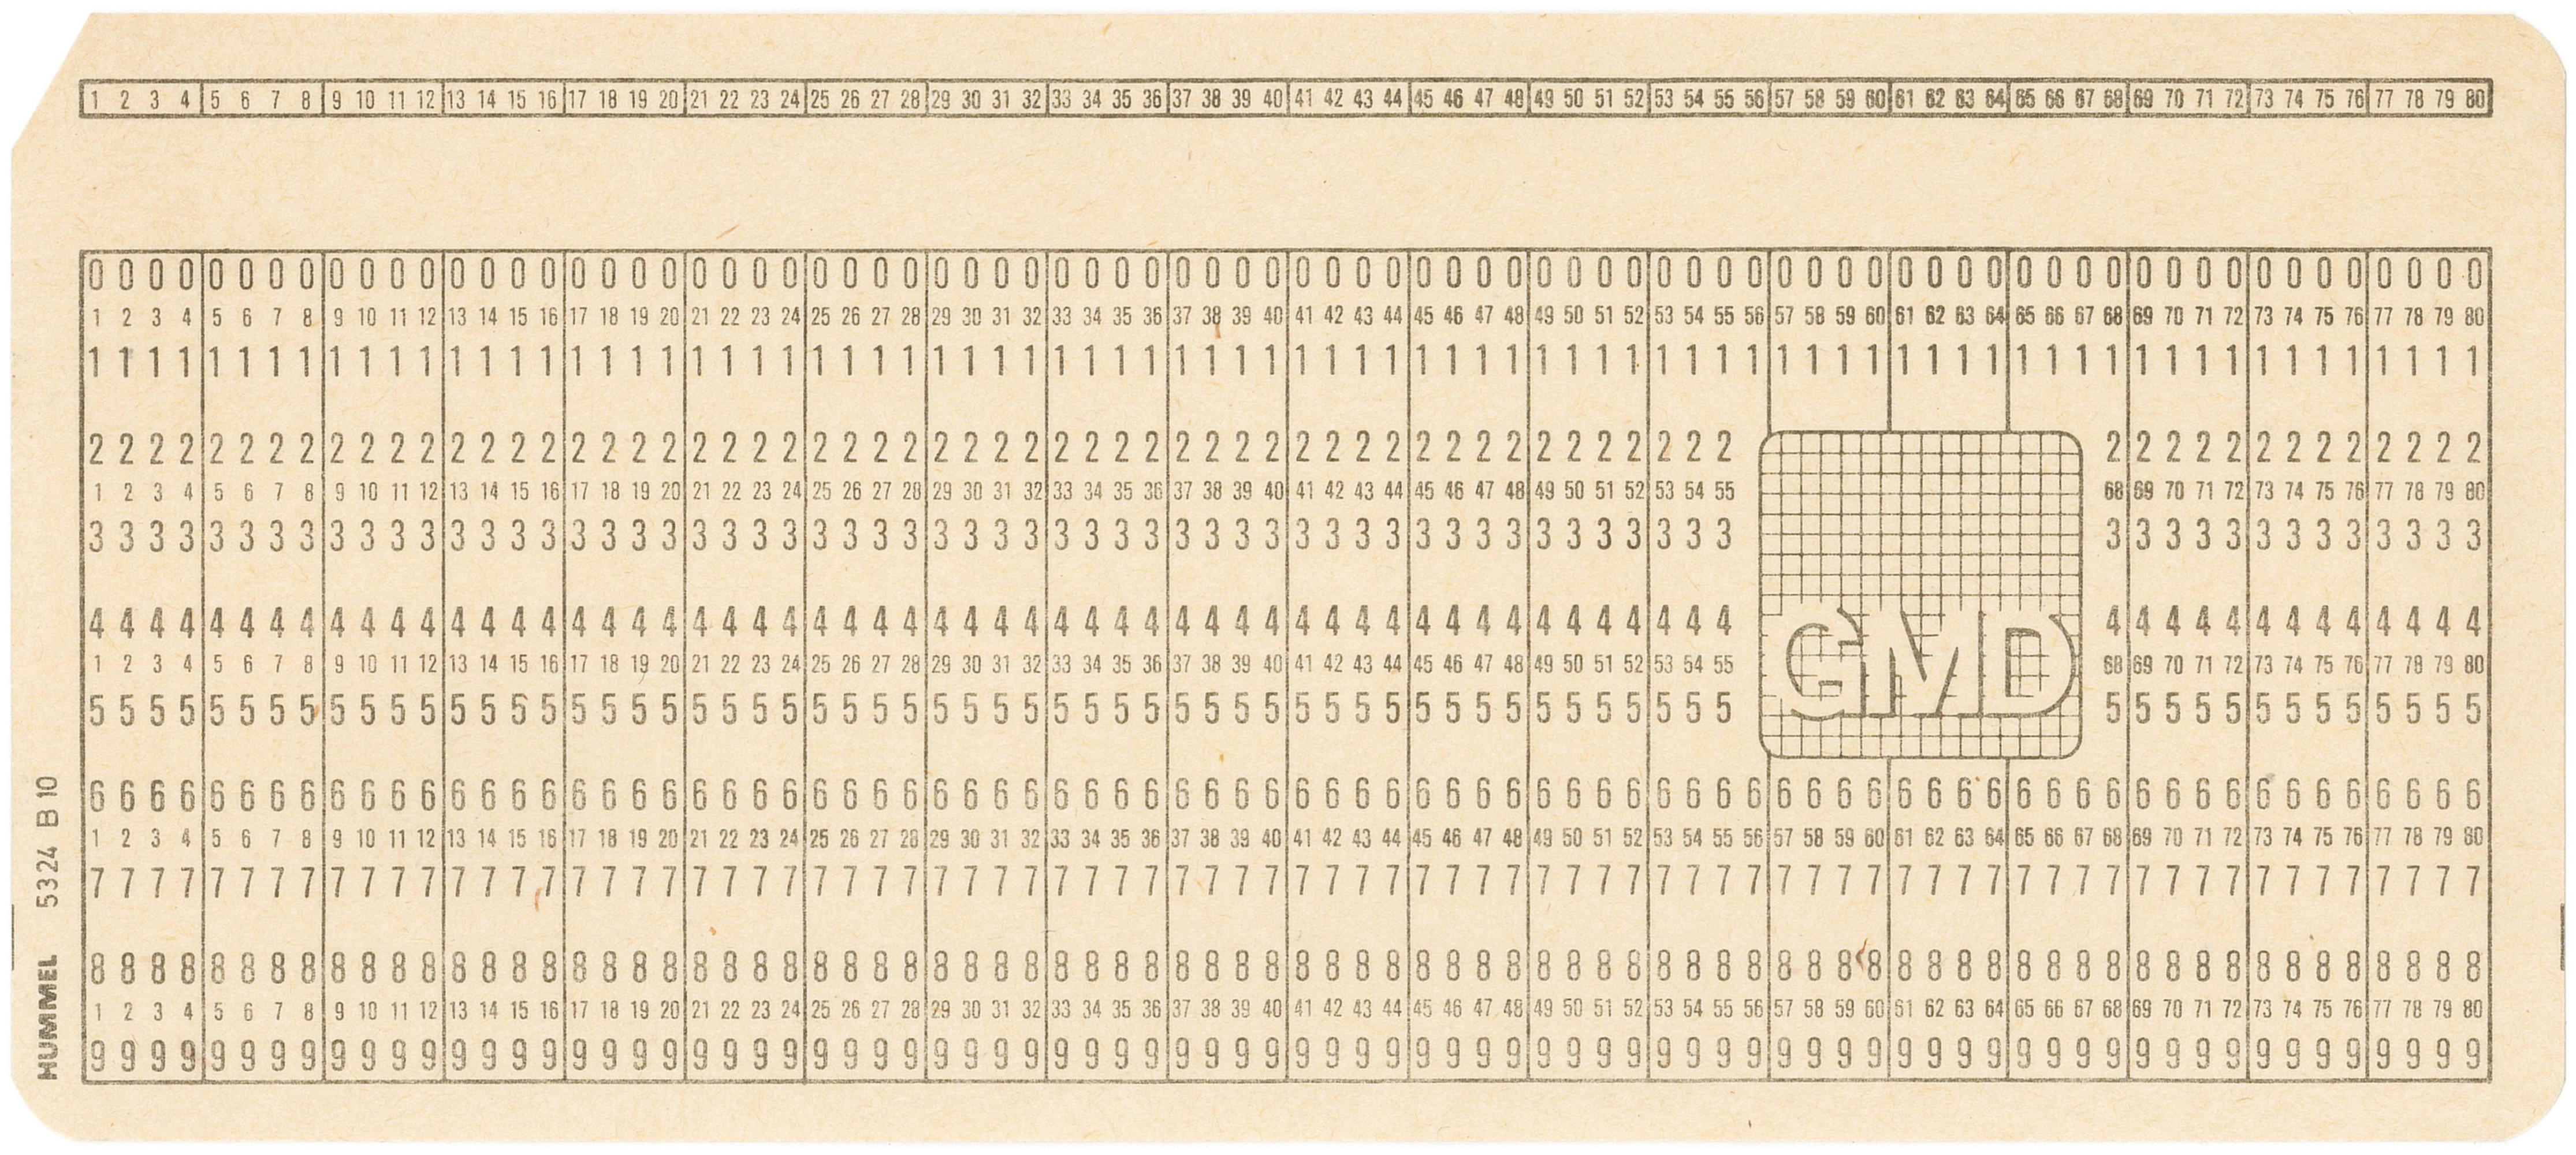 Douglas W. Jones's collection of general purpose punched cards